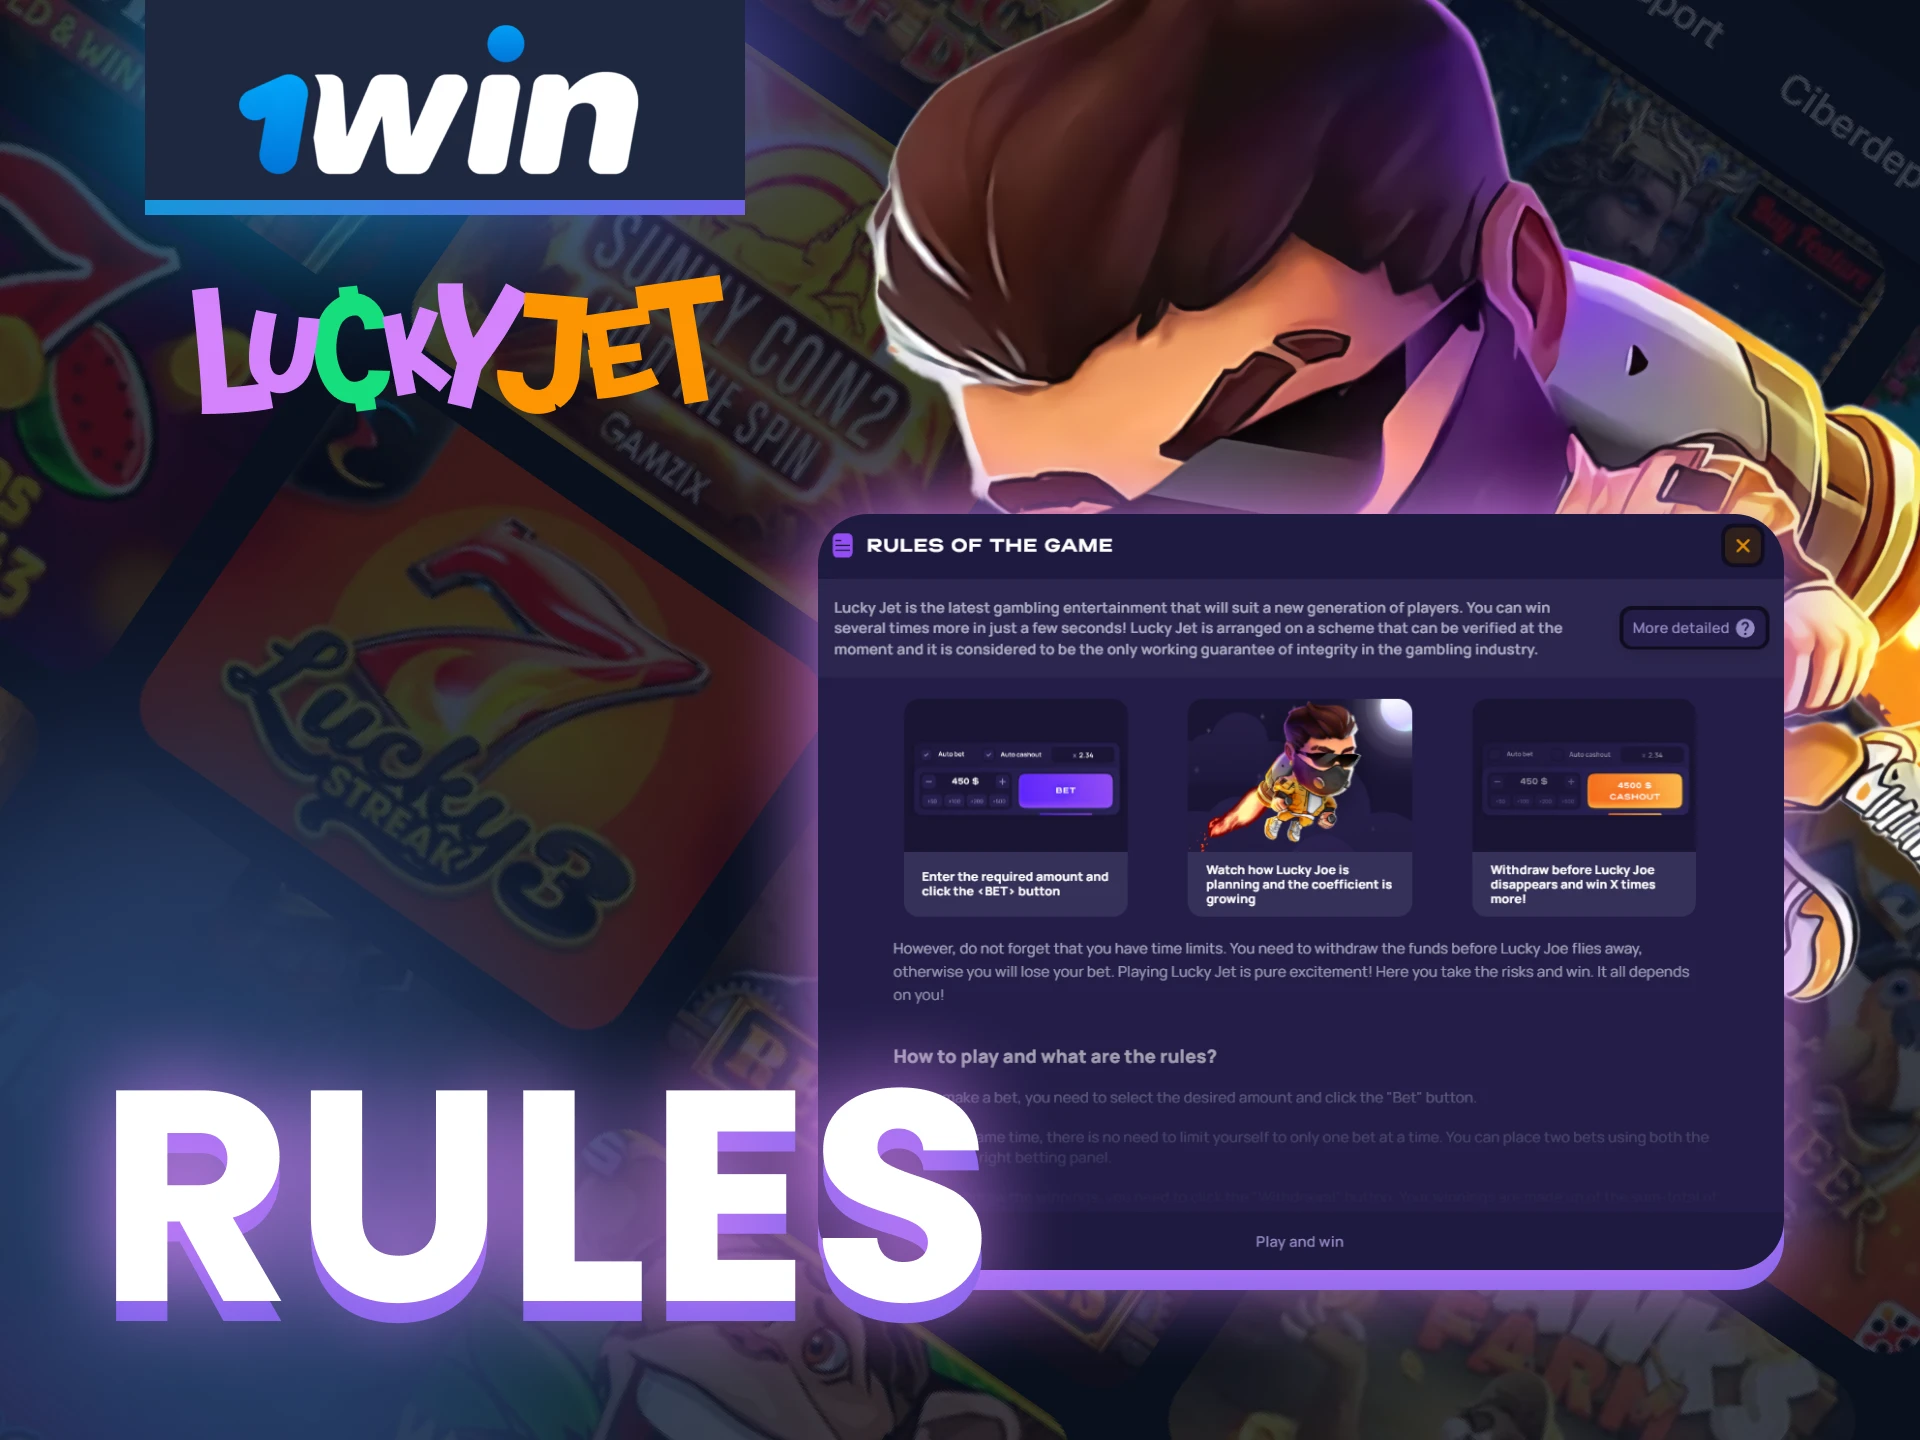 Learn the rules of the Lucky Jet game from 1win.